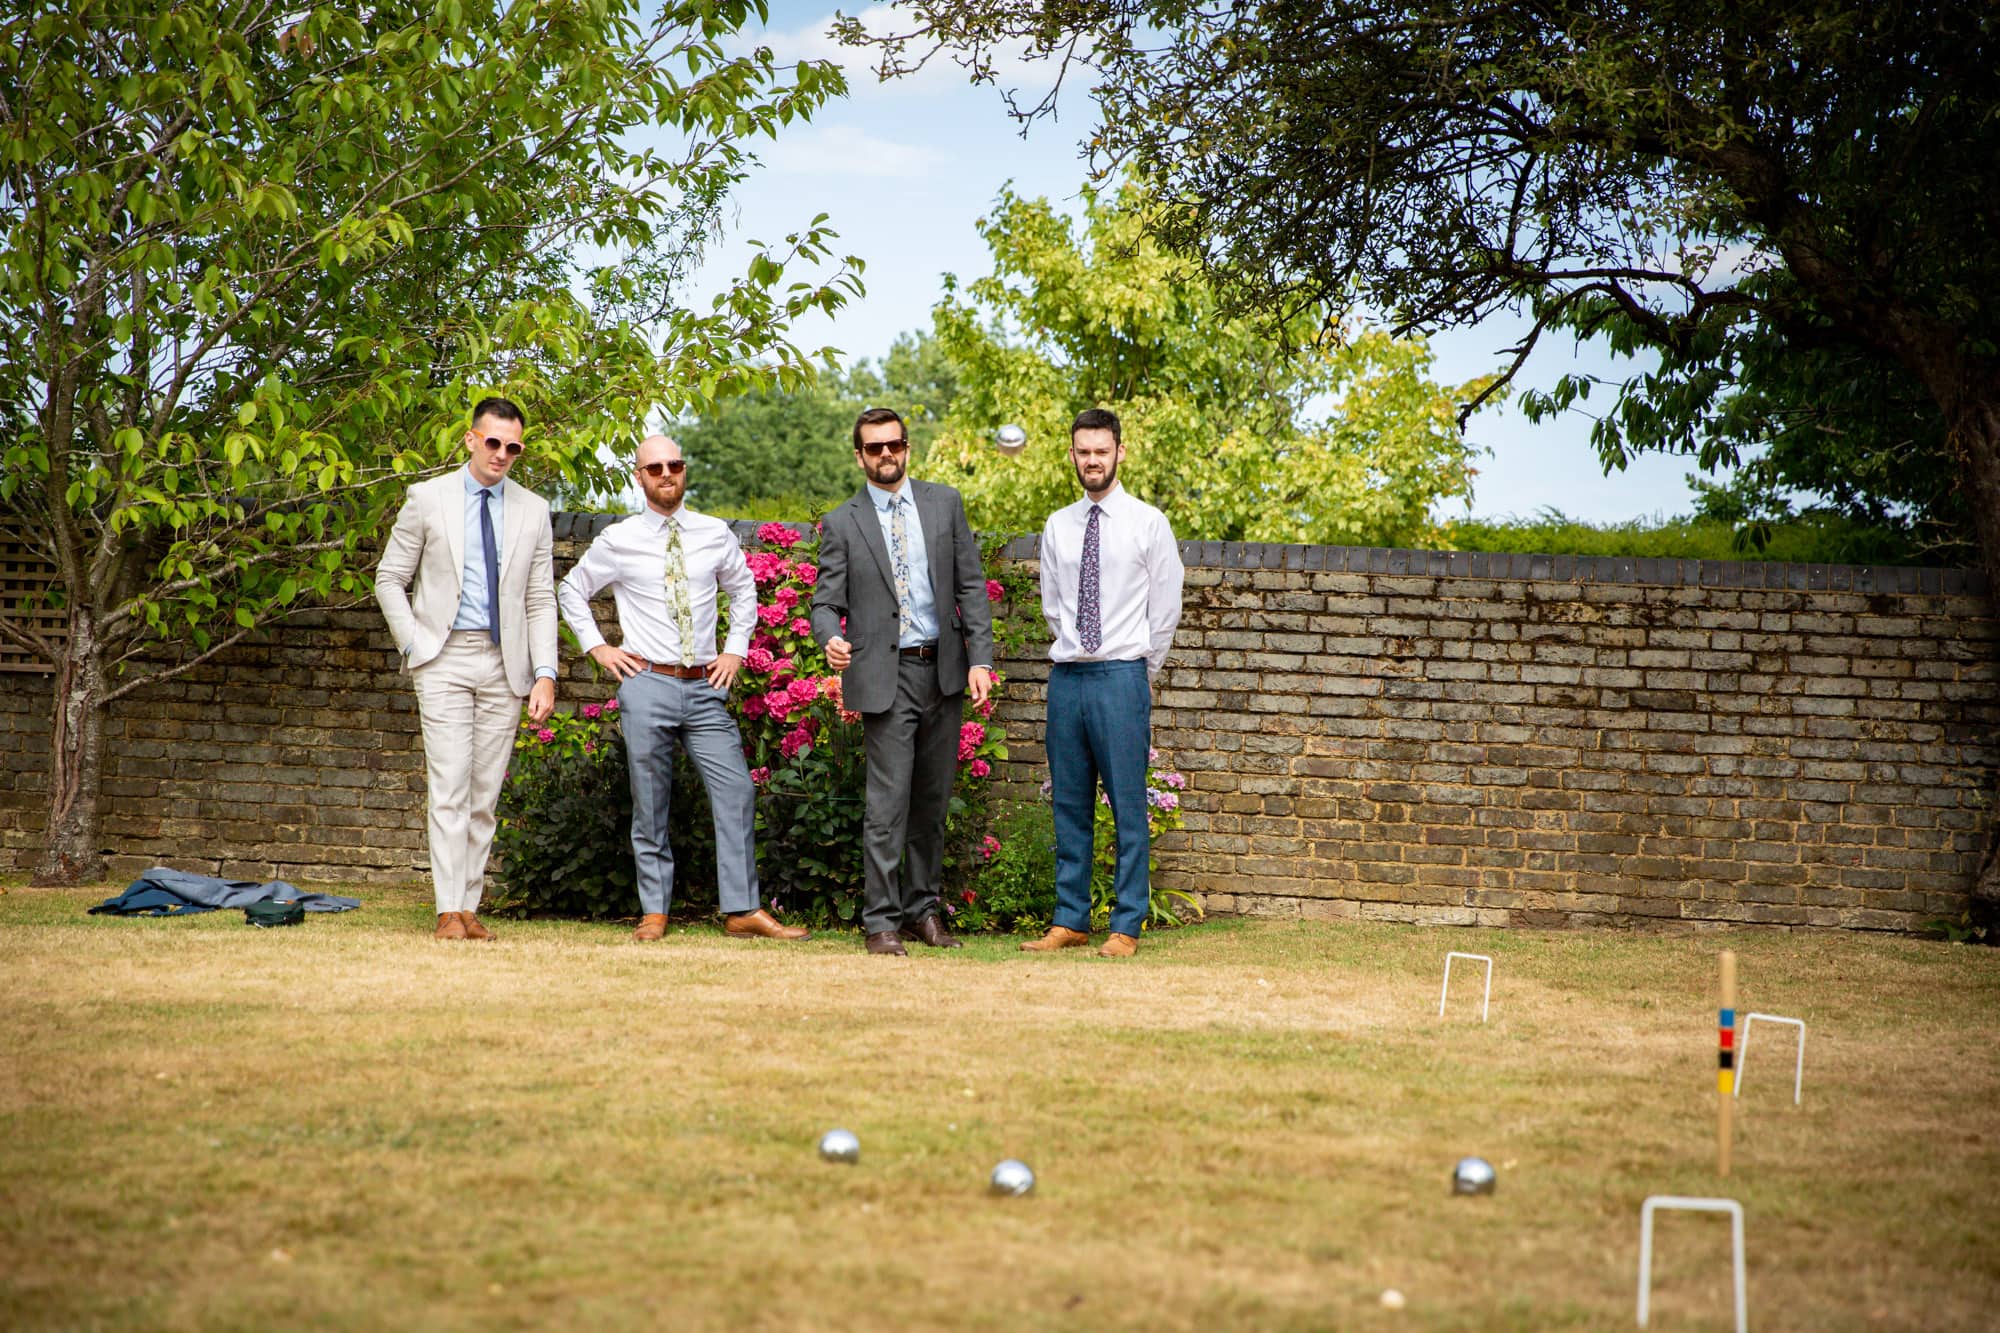 Guys playing boules on grass at Oaks Farm Weddings